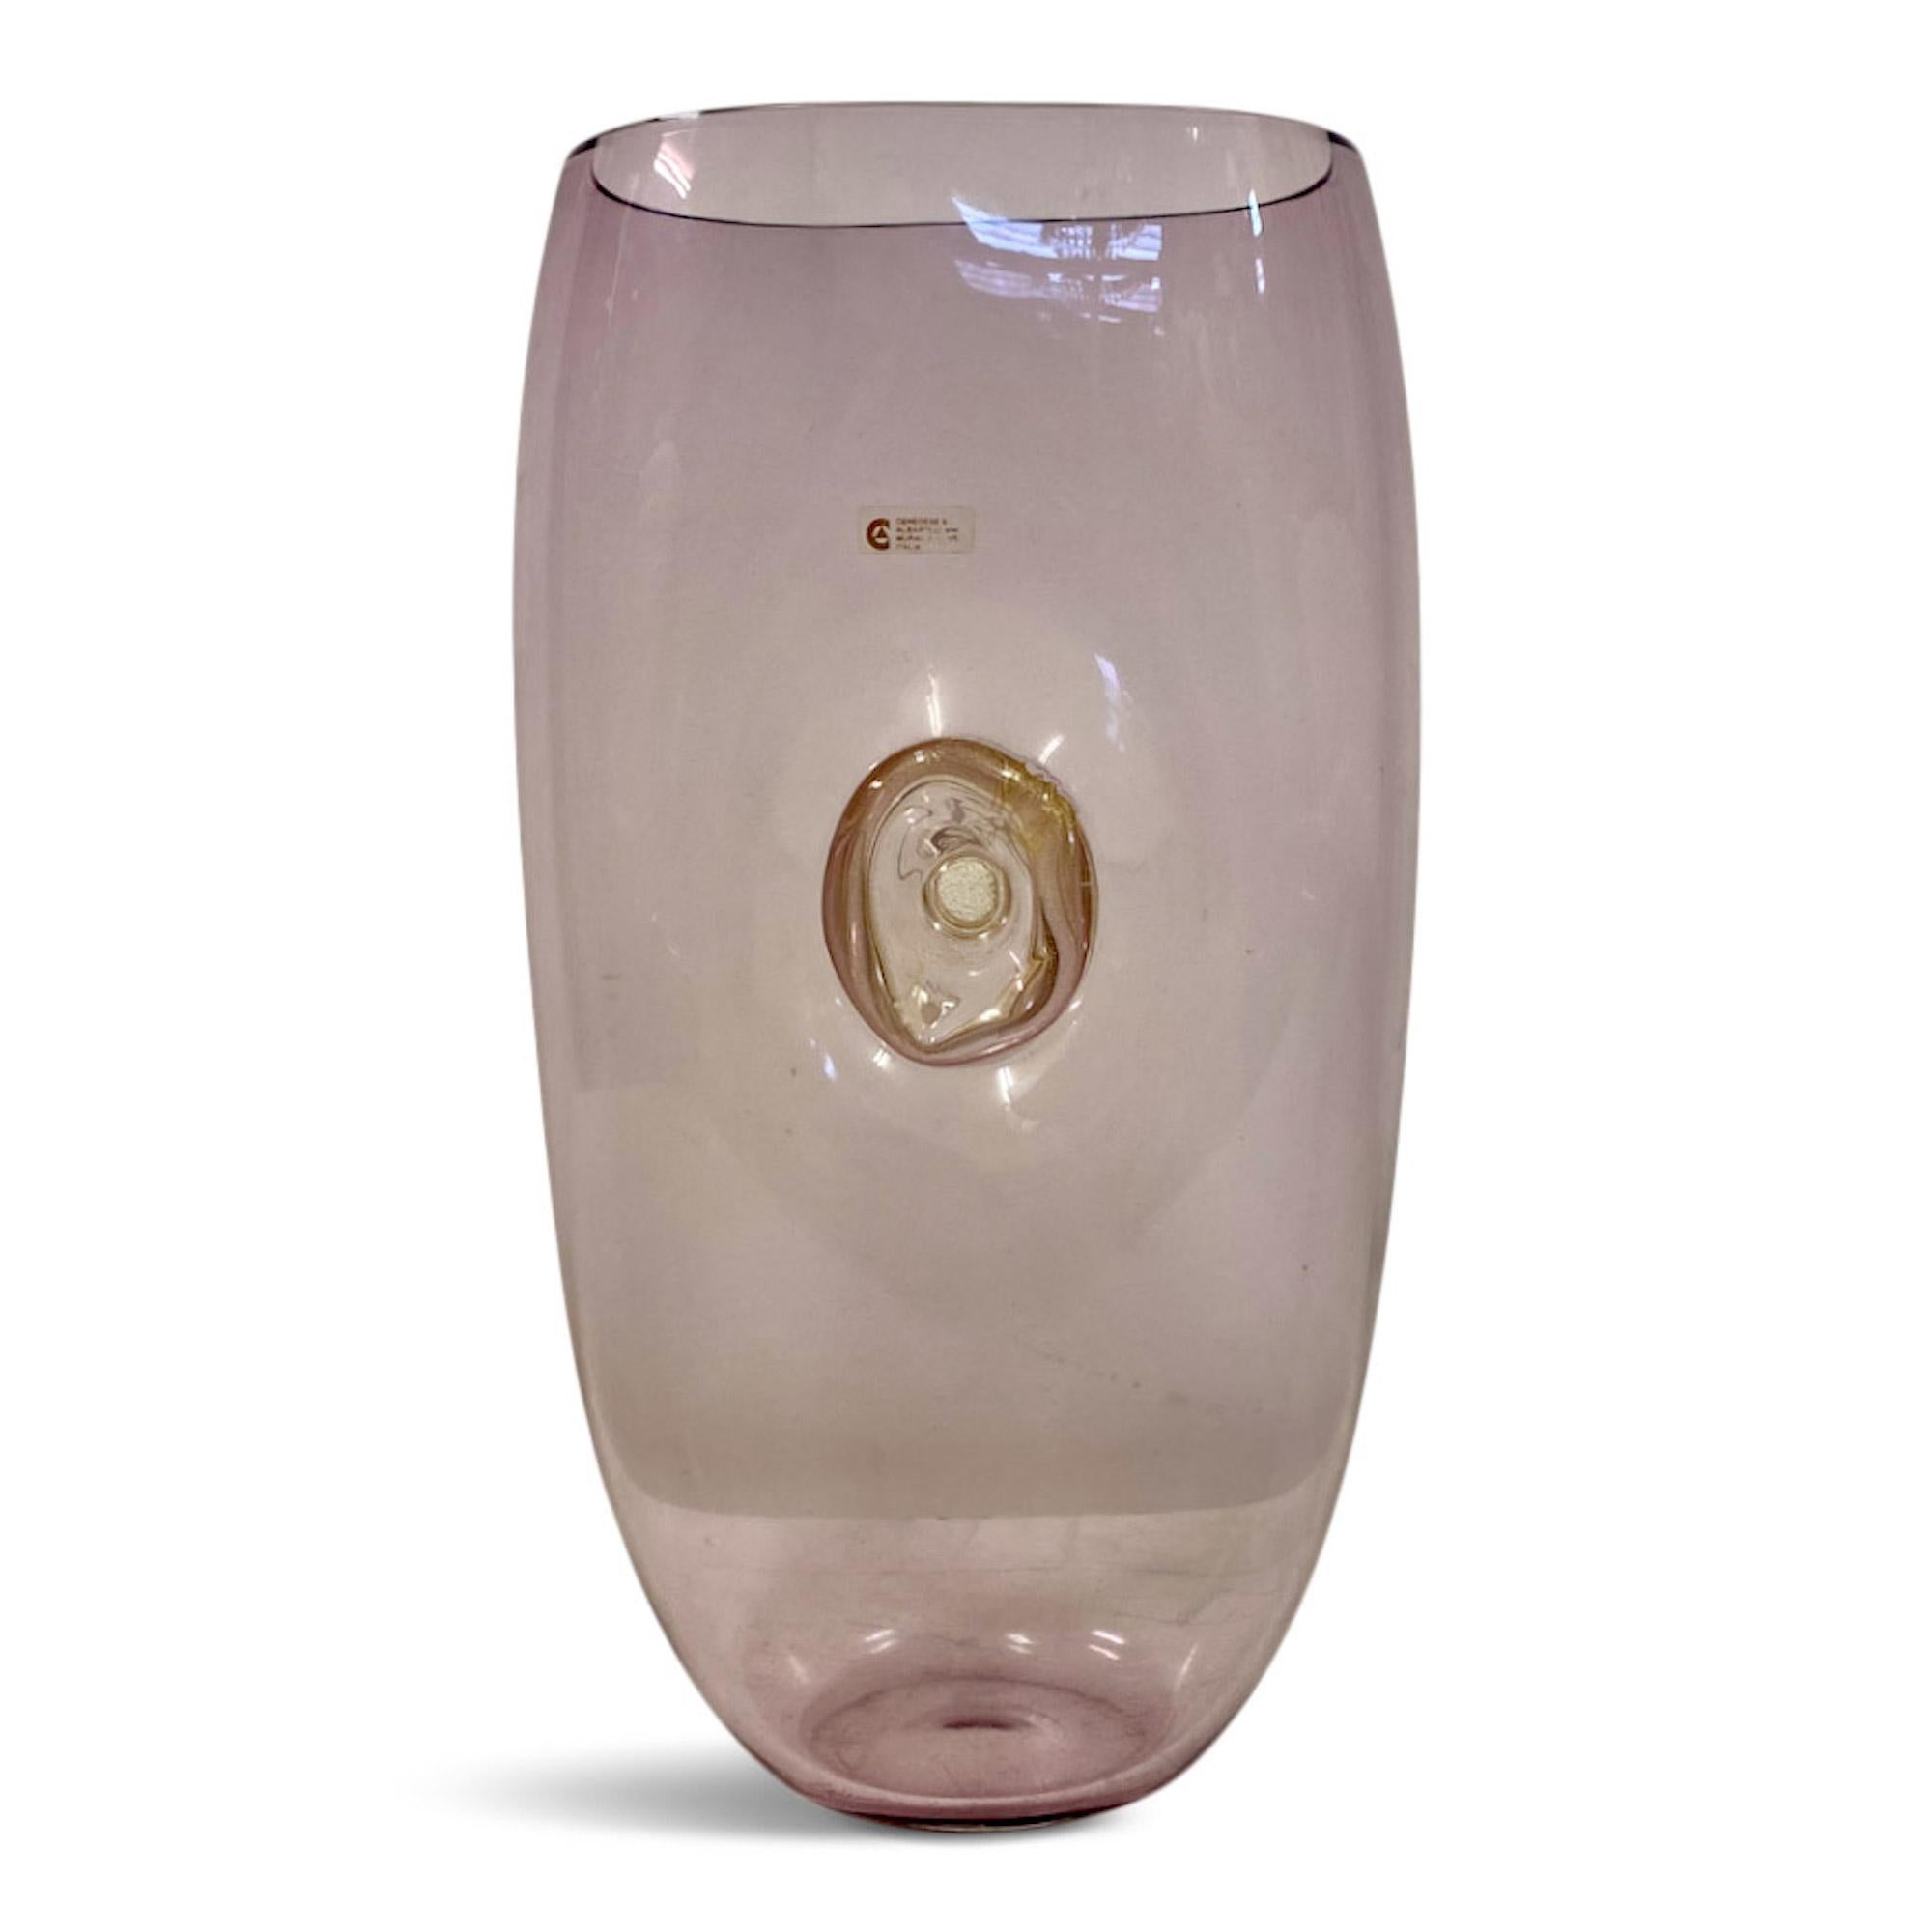 Large vase

Murano glass

By Cenedese and Albarelli

Light mauve colour

Gold leaf inclusions

Labelled

Italy 1970s/1980s.